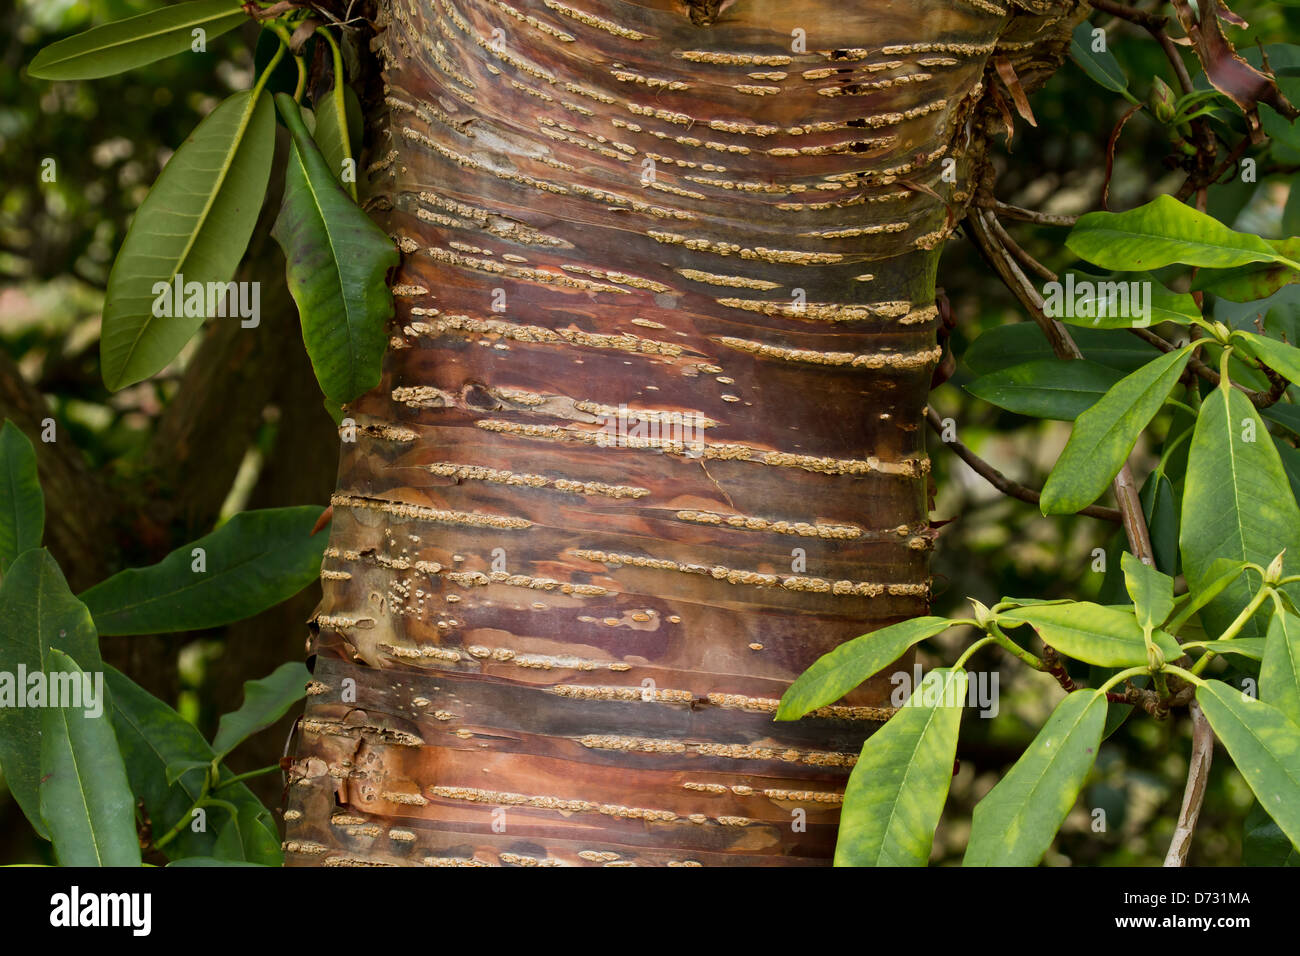 Himalayan Cherry Tree trunk showing patterned bark. Stock Photo